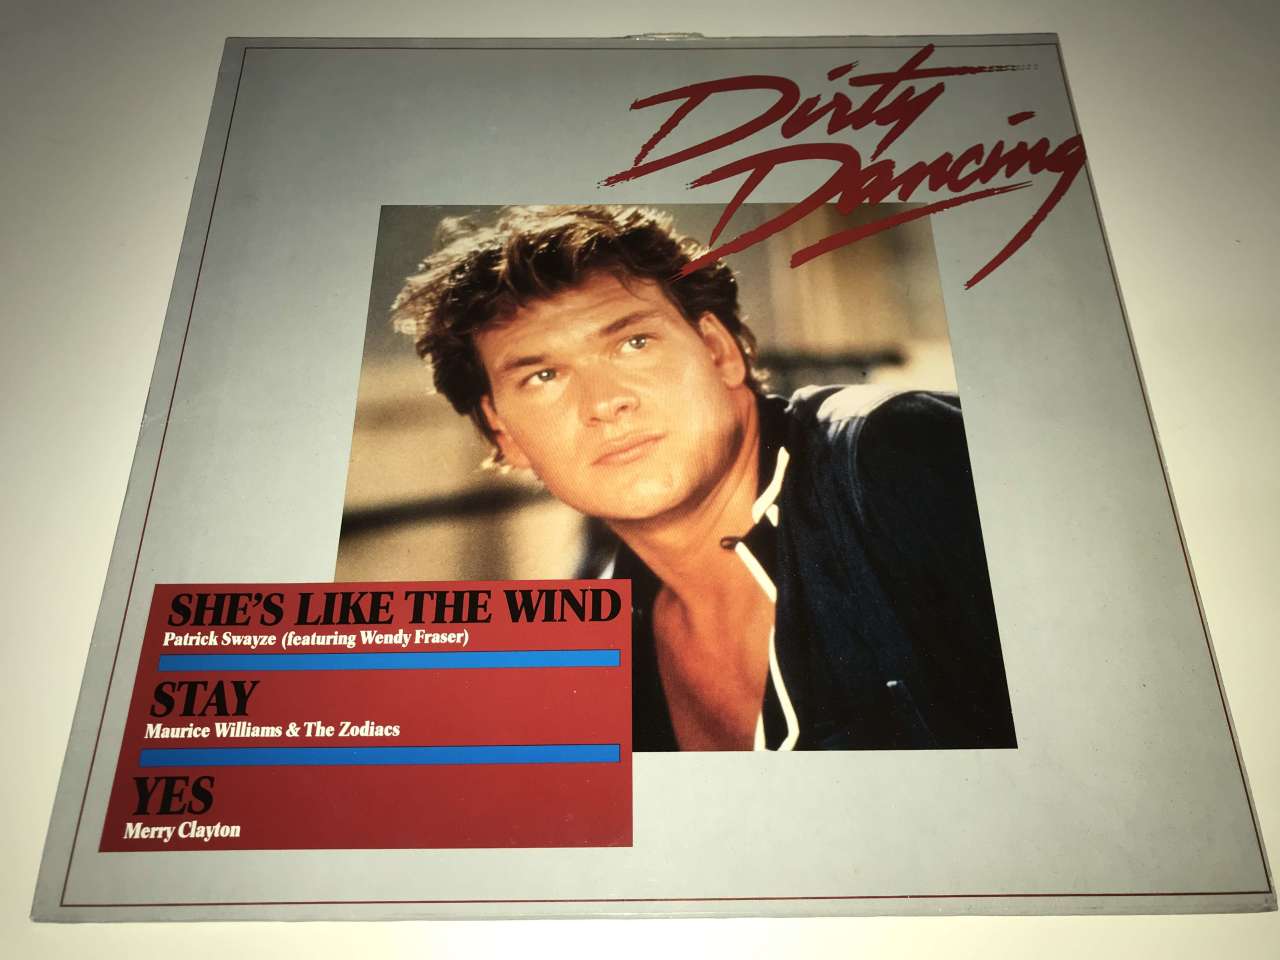 Patrick Swayze Featuring Wendy Fraser – She's Like The Wind (Dirty Dancing)